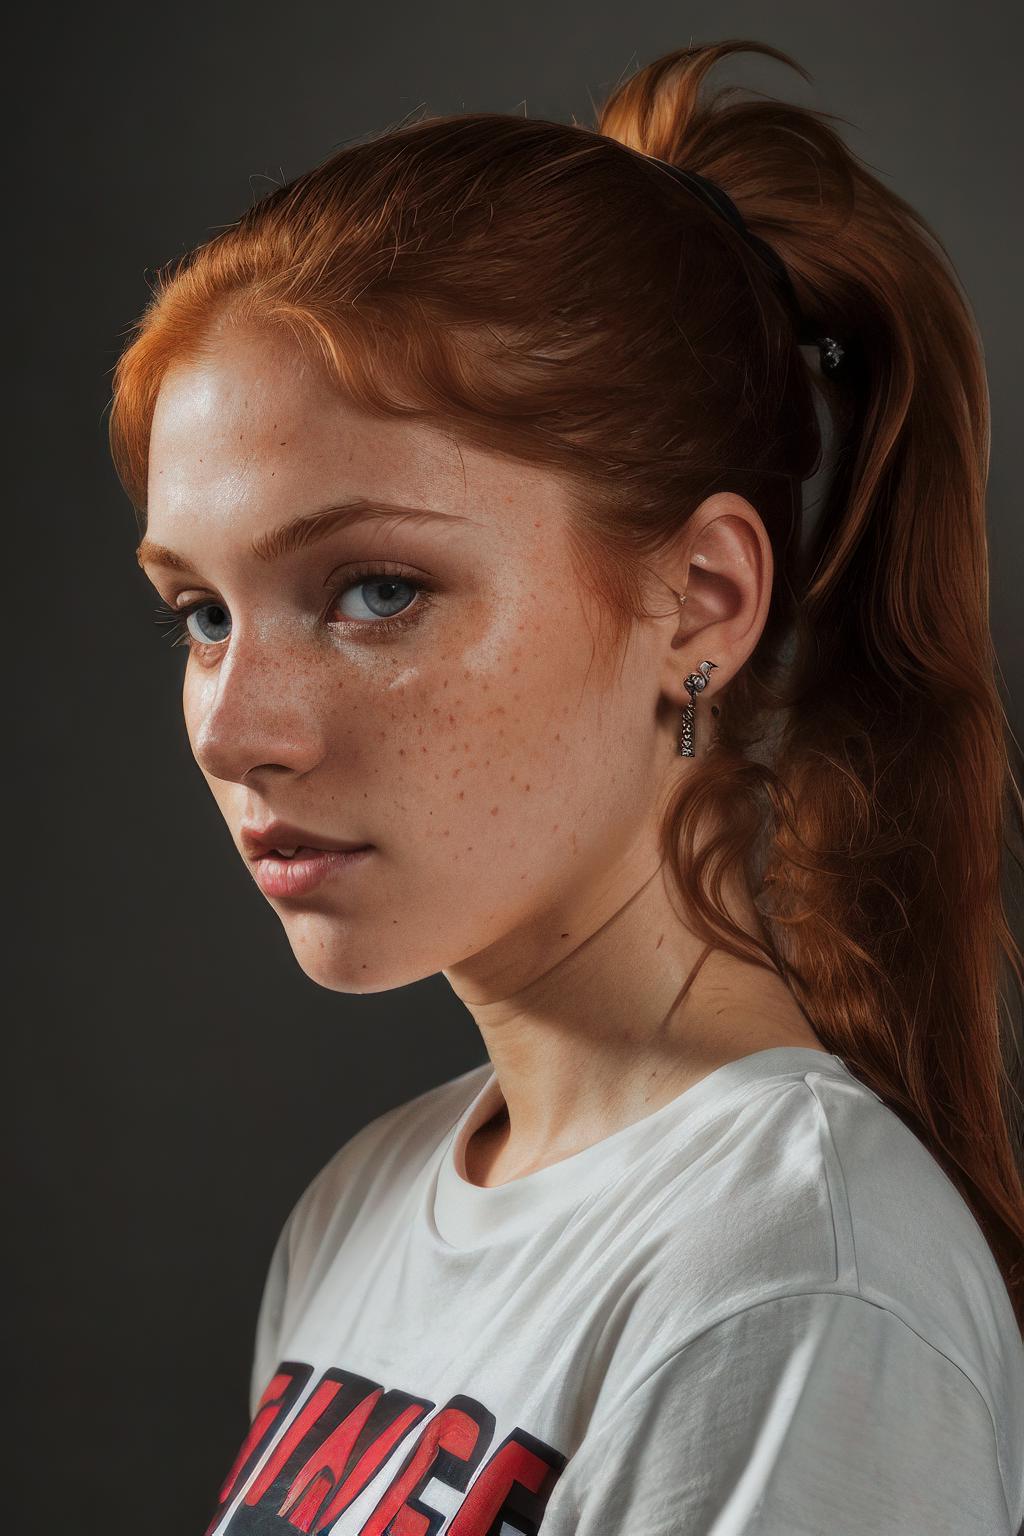 A young woman with red hair, wearing a white shirt and earrings, stares into the camera.